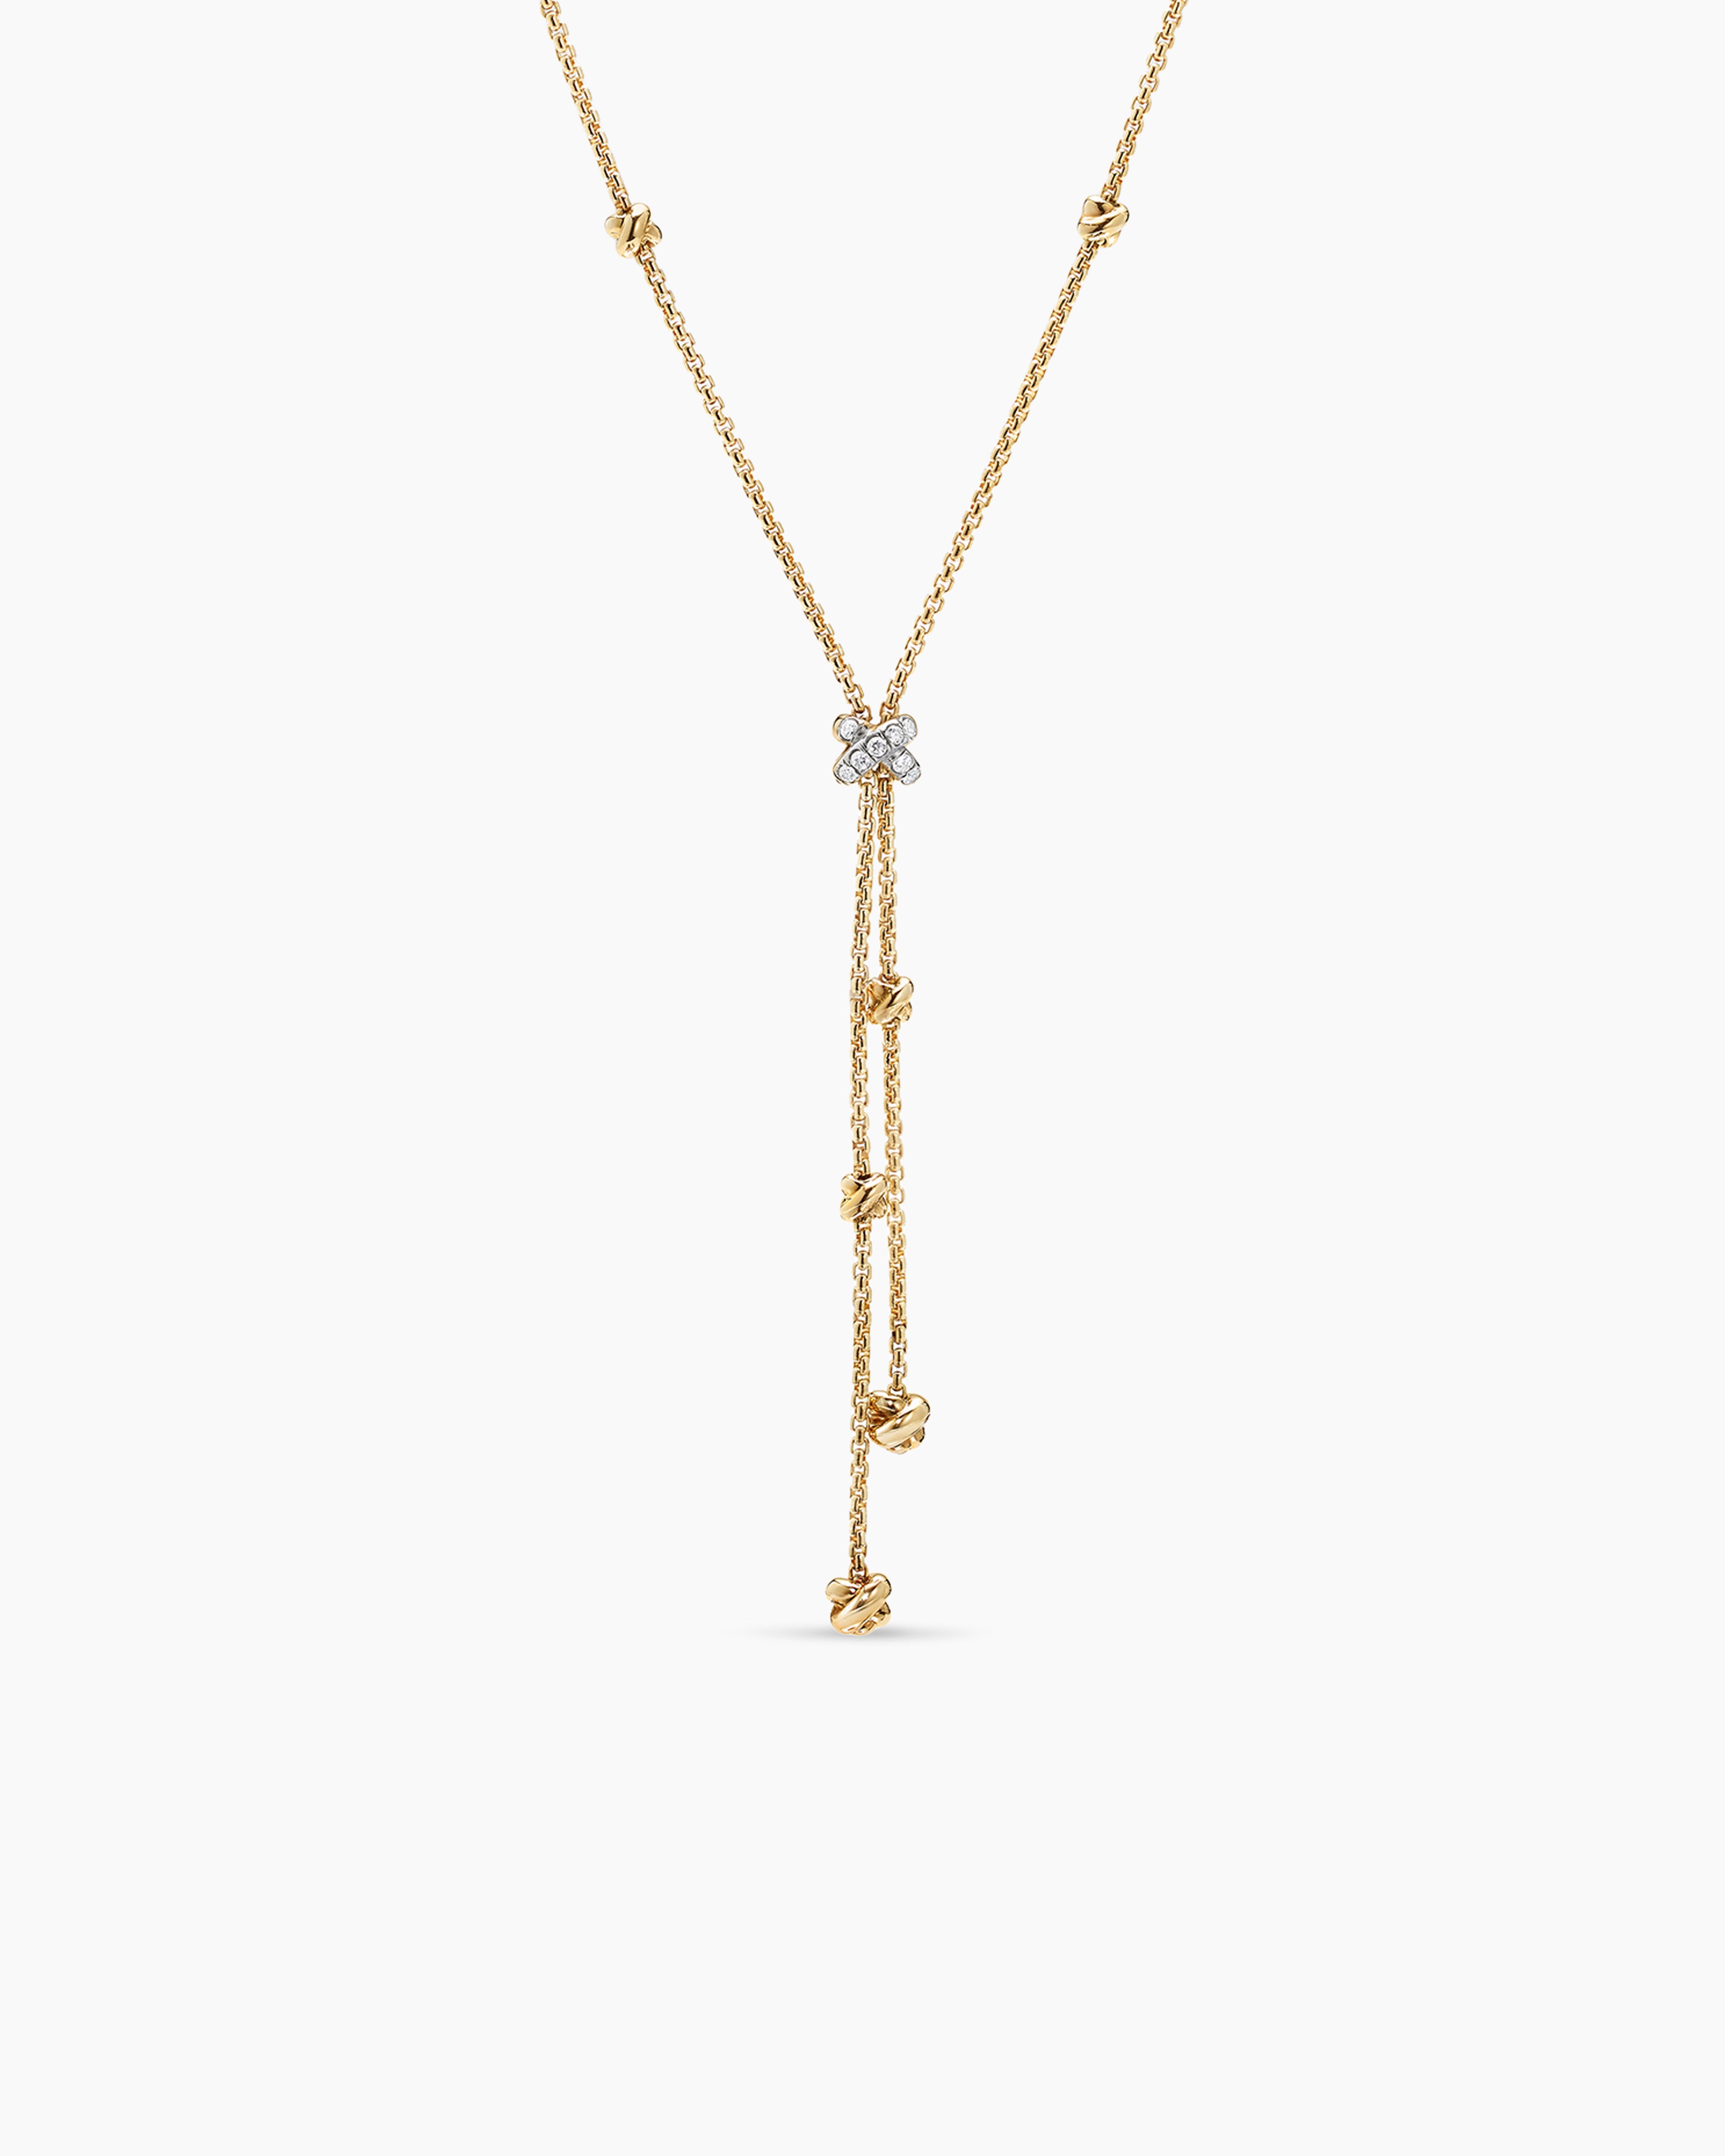 Dolla Bill Y'all Dollar Necklace in 14K Gold - White Trash Charms